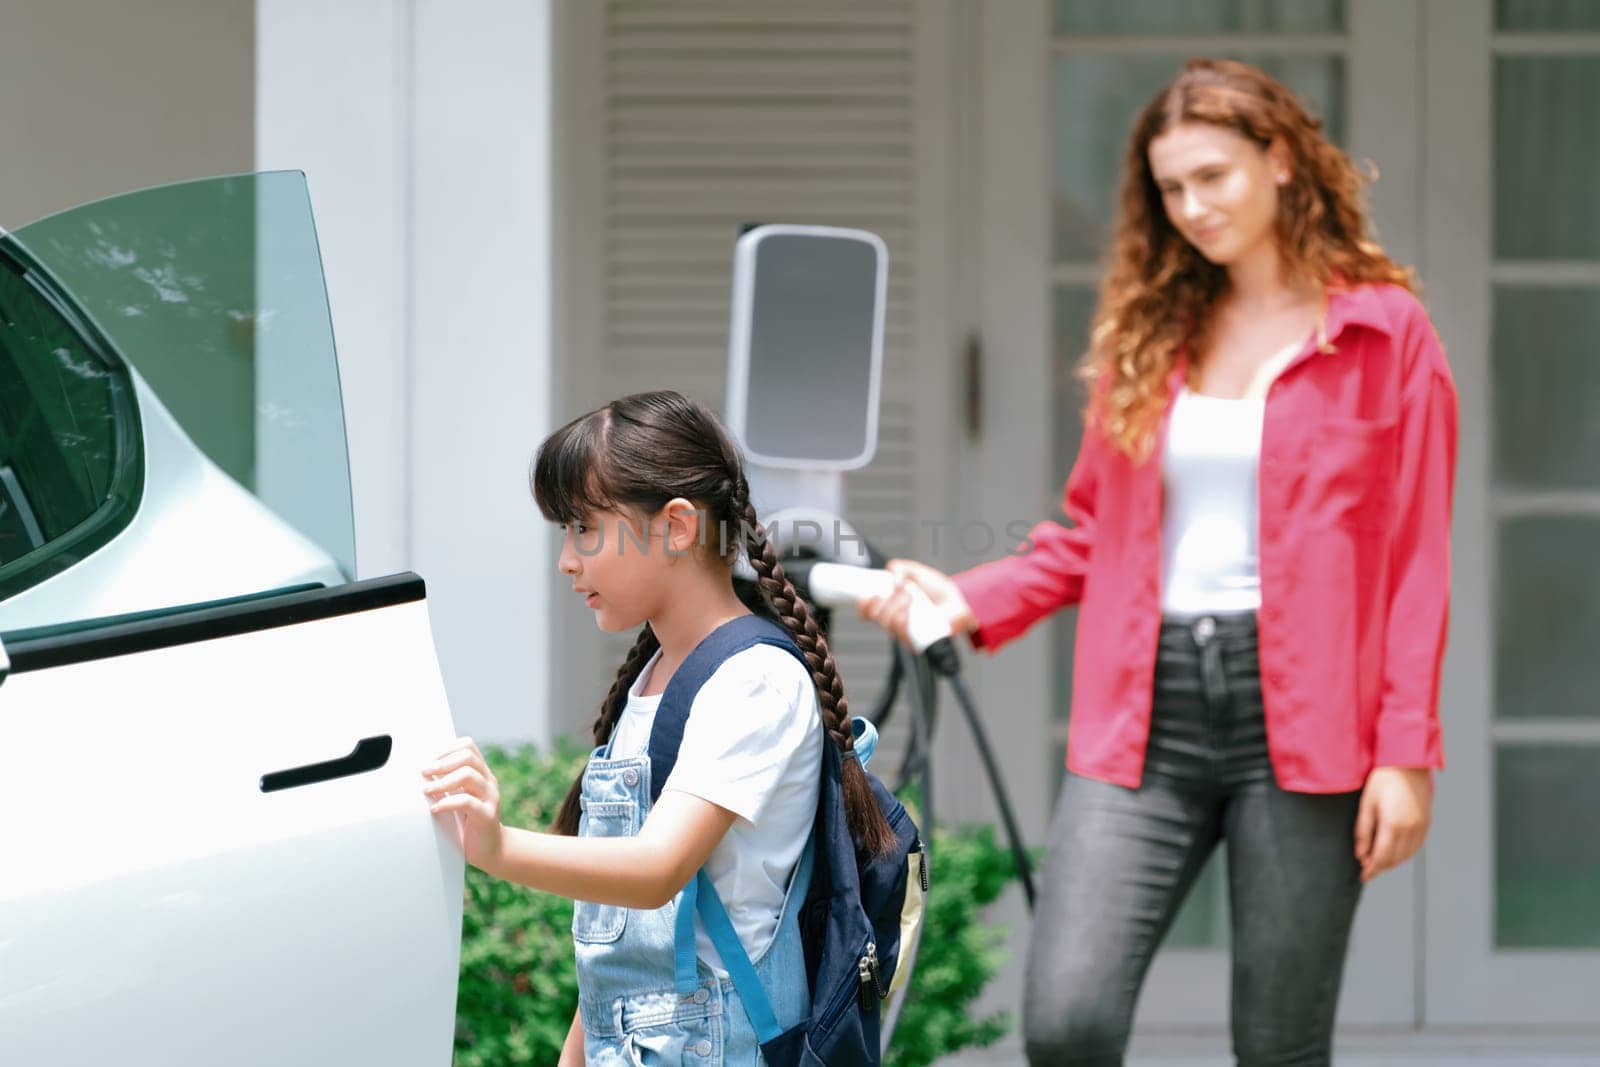 Happy little young girl learn about eco-friendly and energy sustainability as she help her mother recharge electric vehicle from home EV charging station. EV car and modern family concept. Synchronos